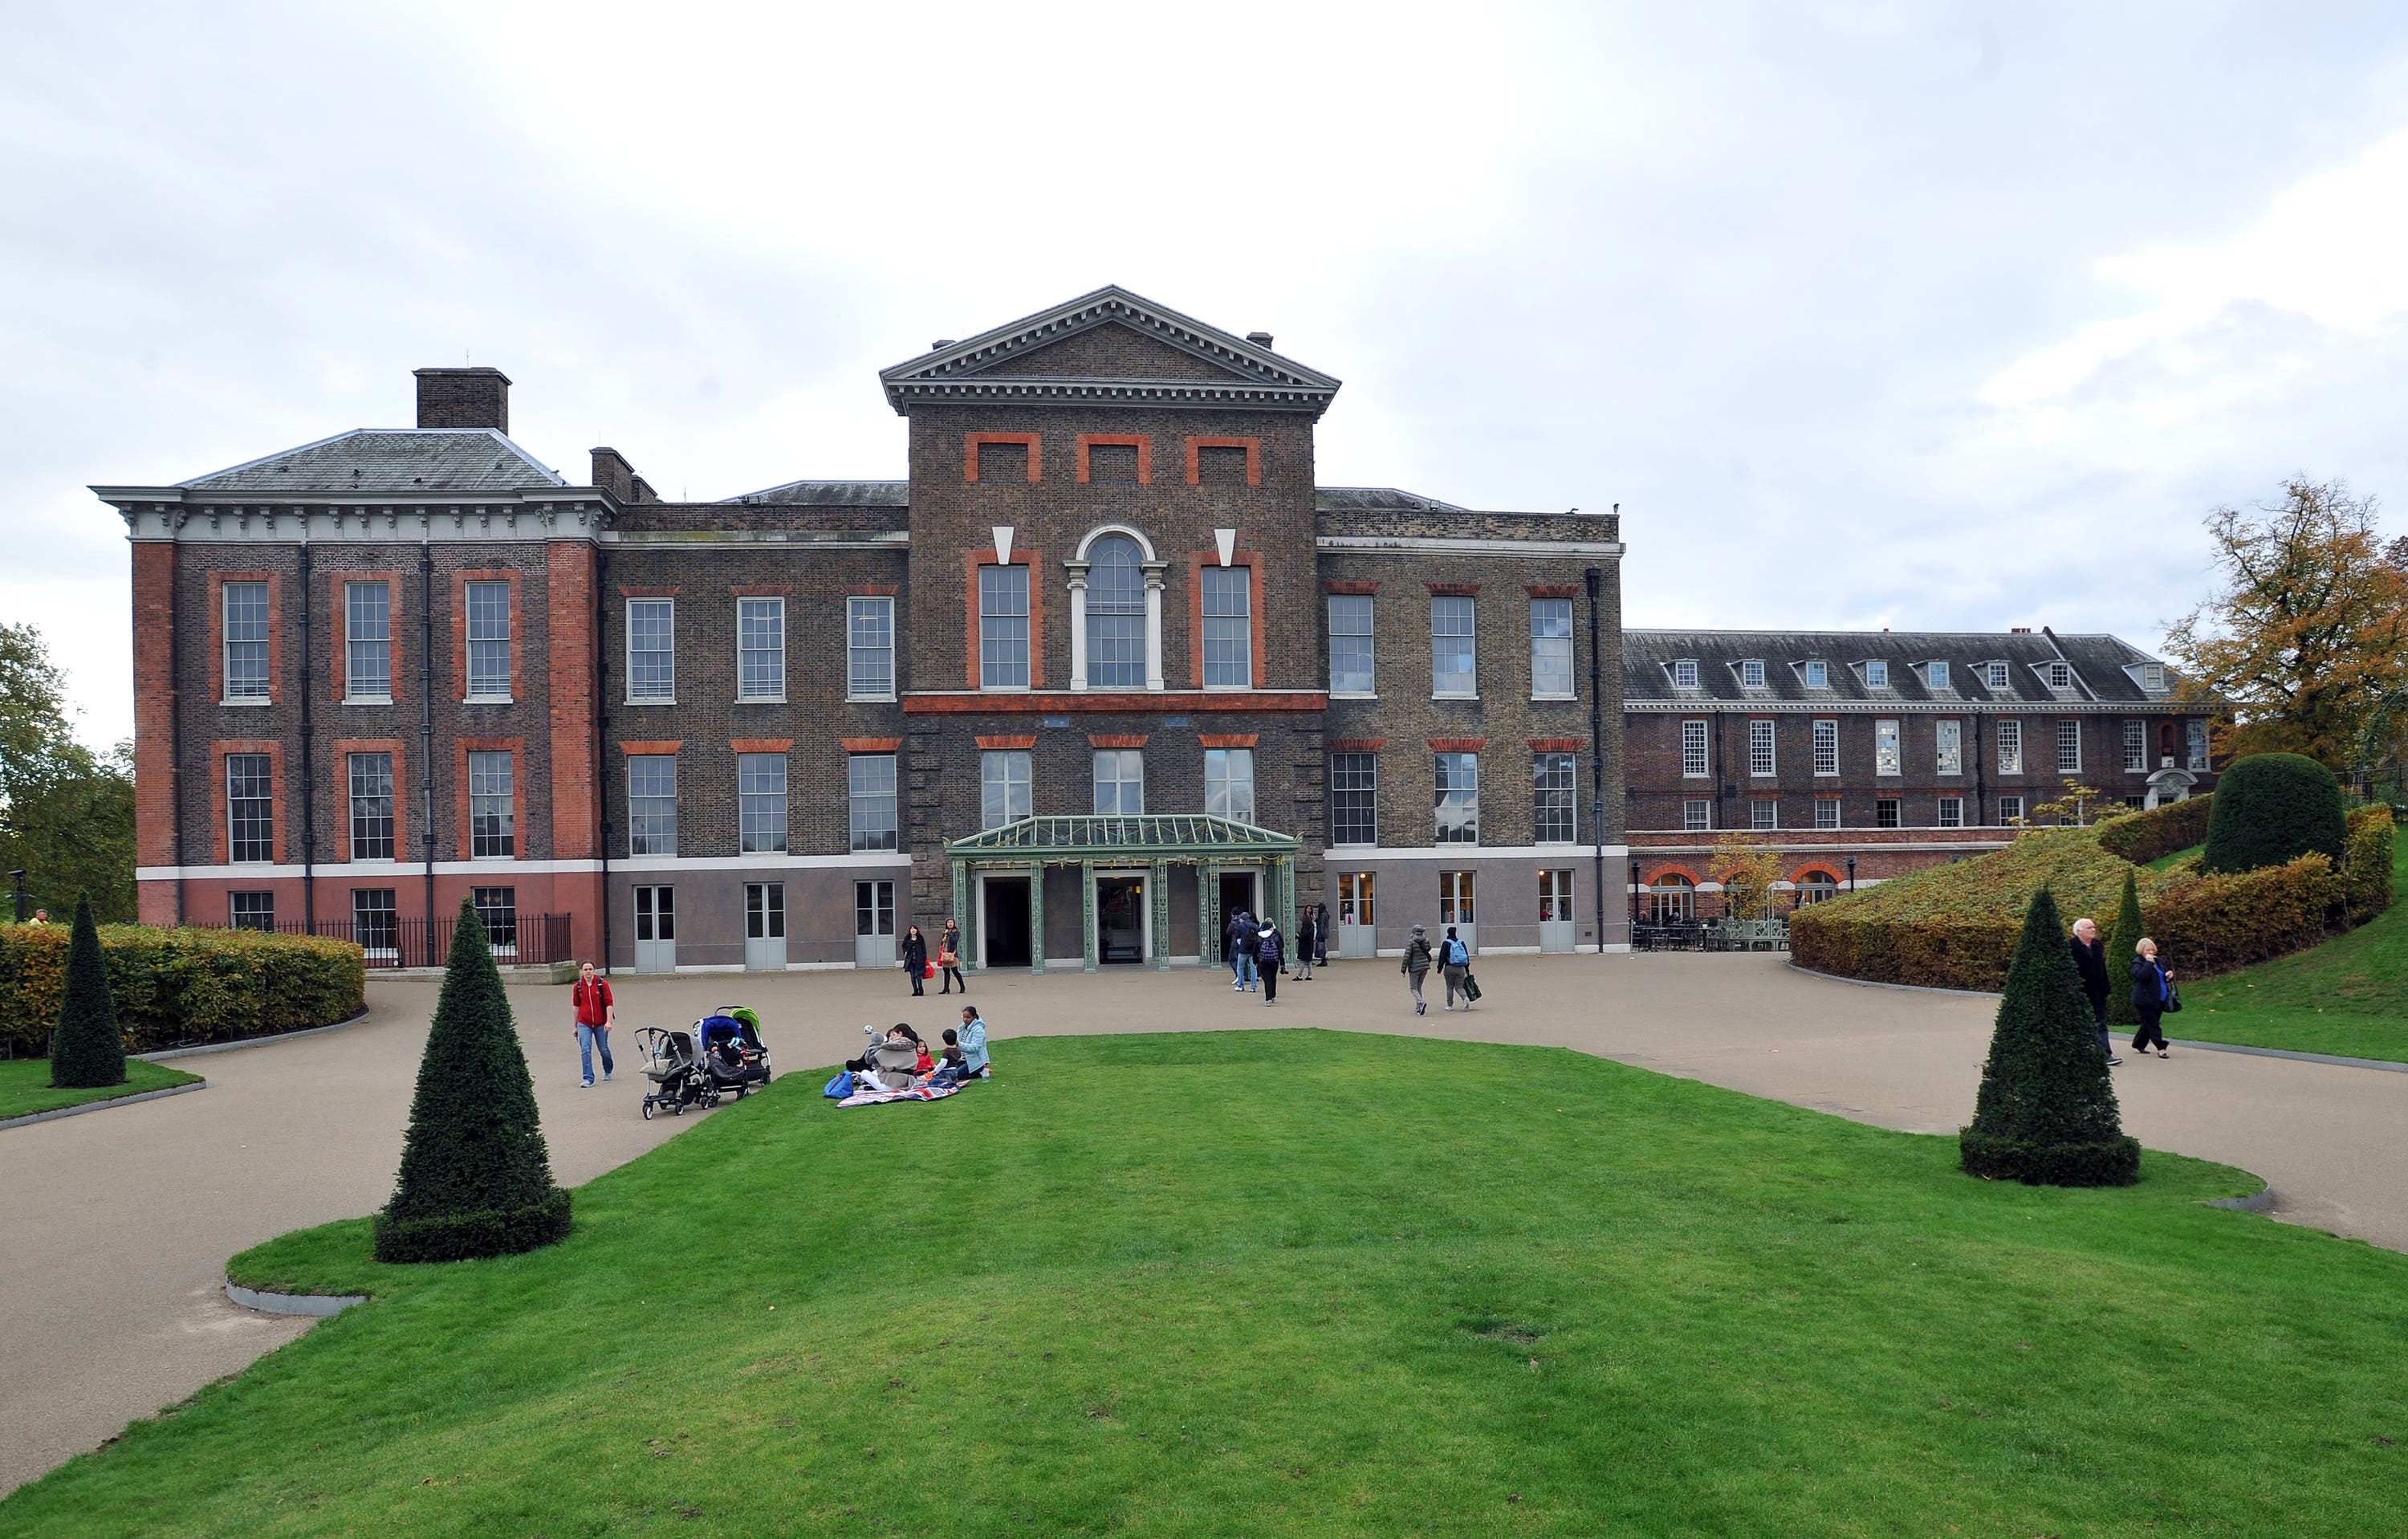 Kensington Palace in London, where William and Kate have Apartment 1A.